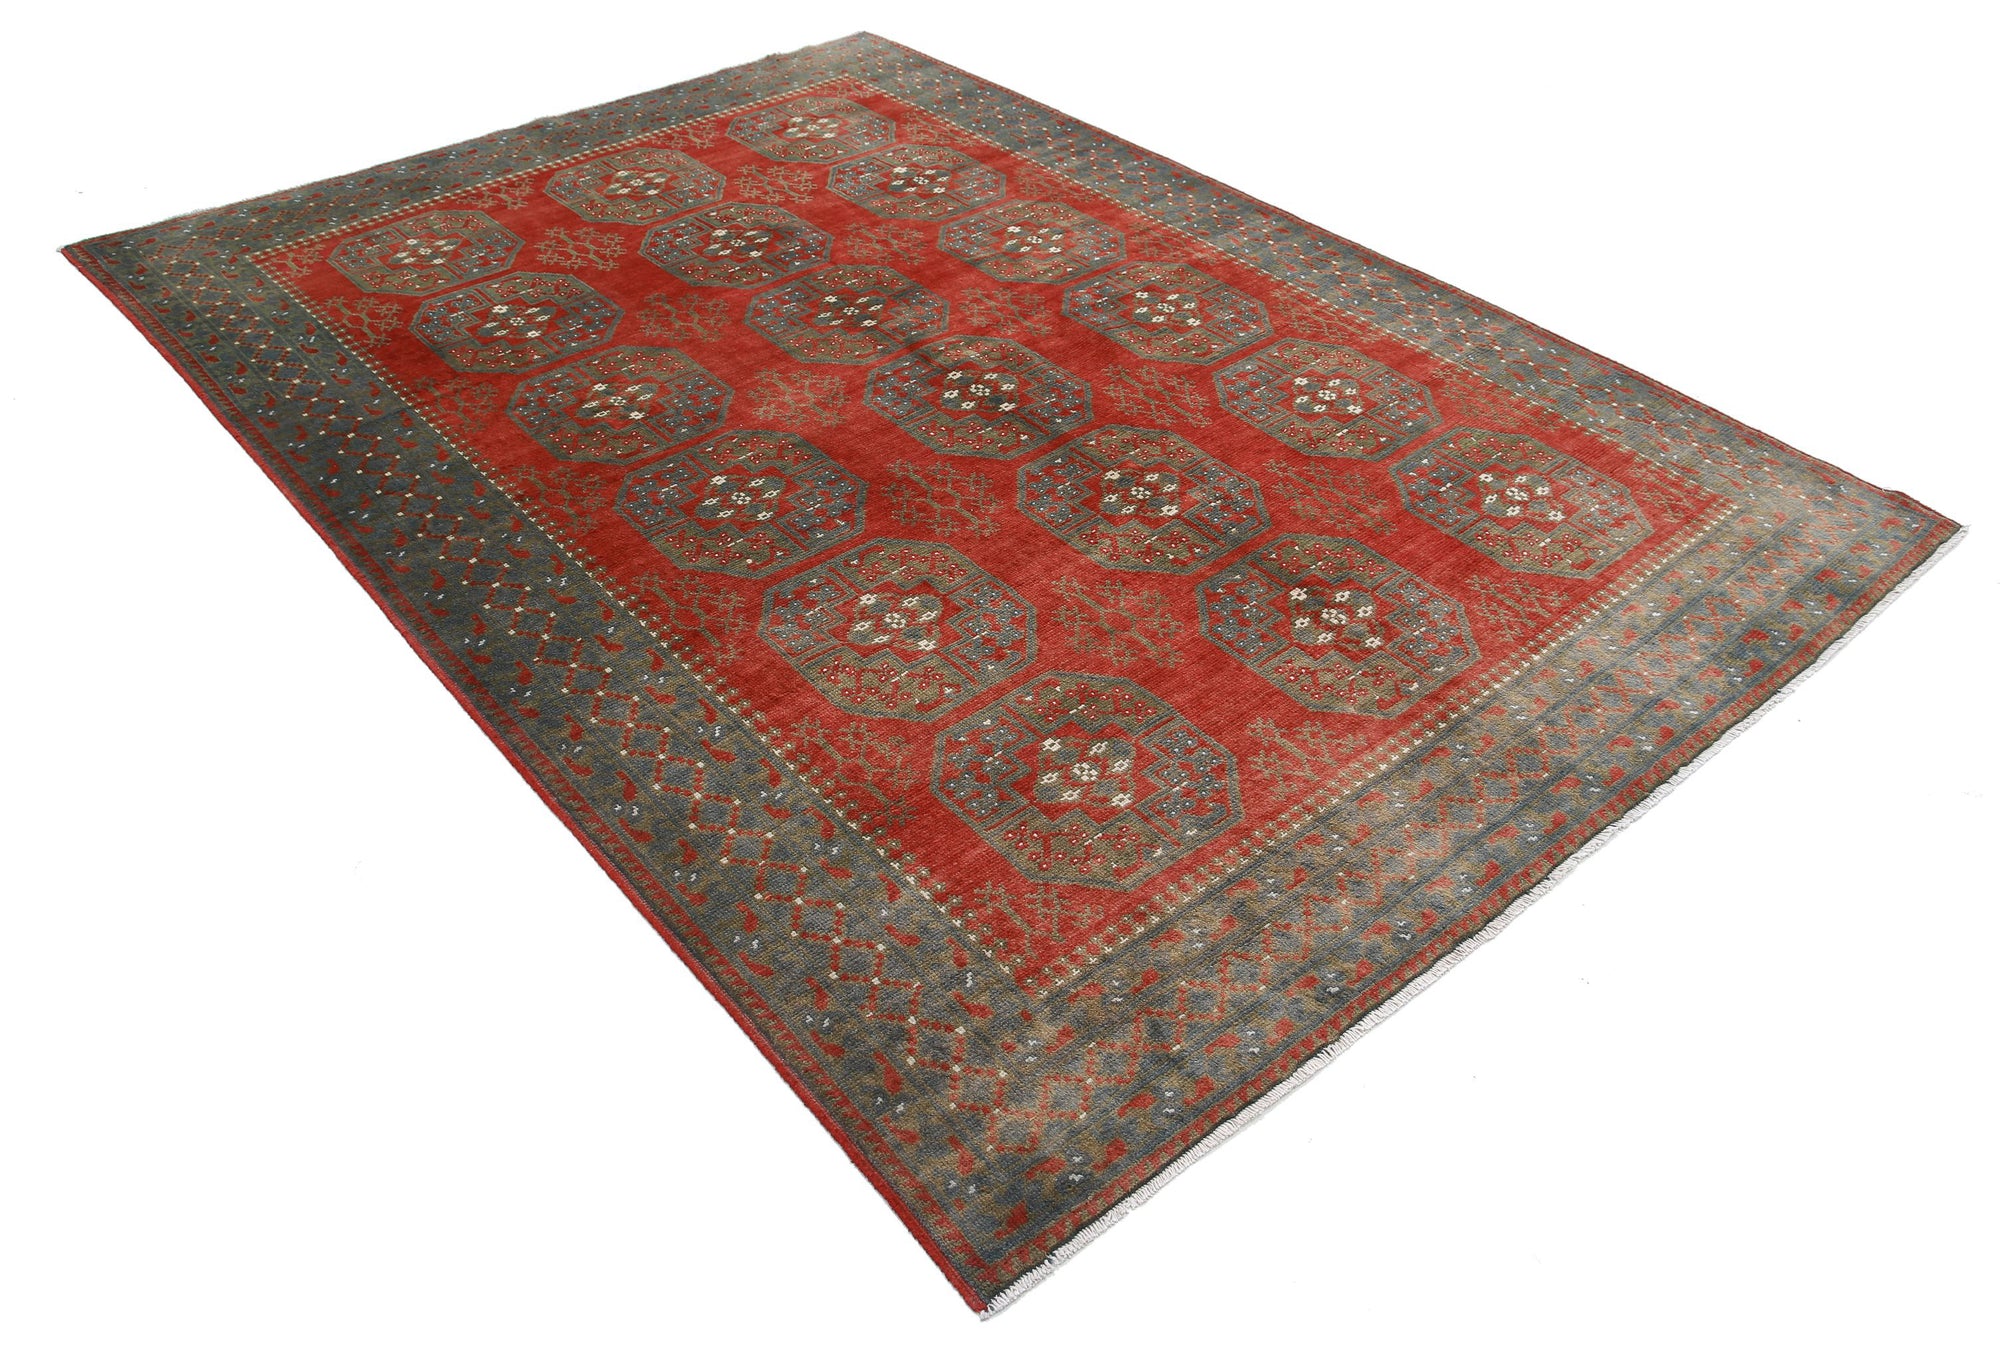 Revival-hand-knotted-gul-collection-wool-rug-5013954-1.jpg